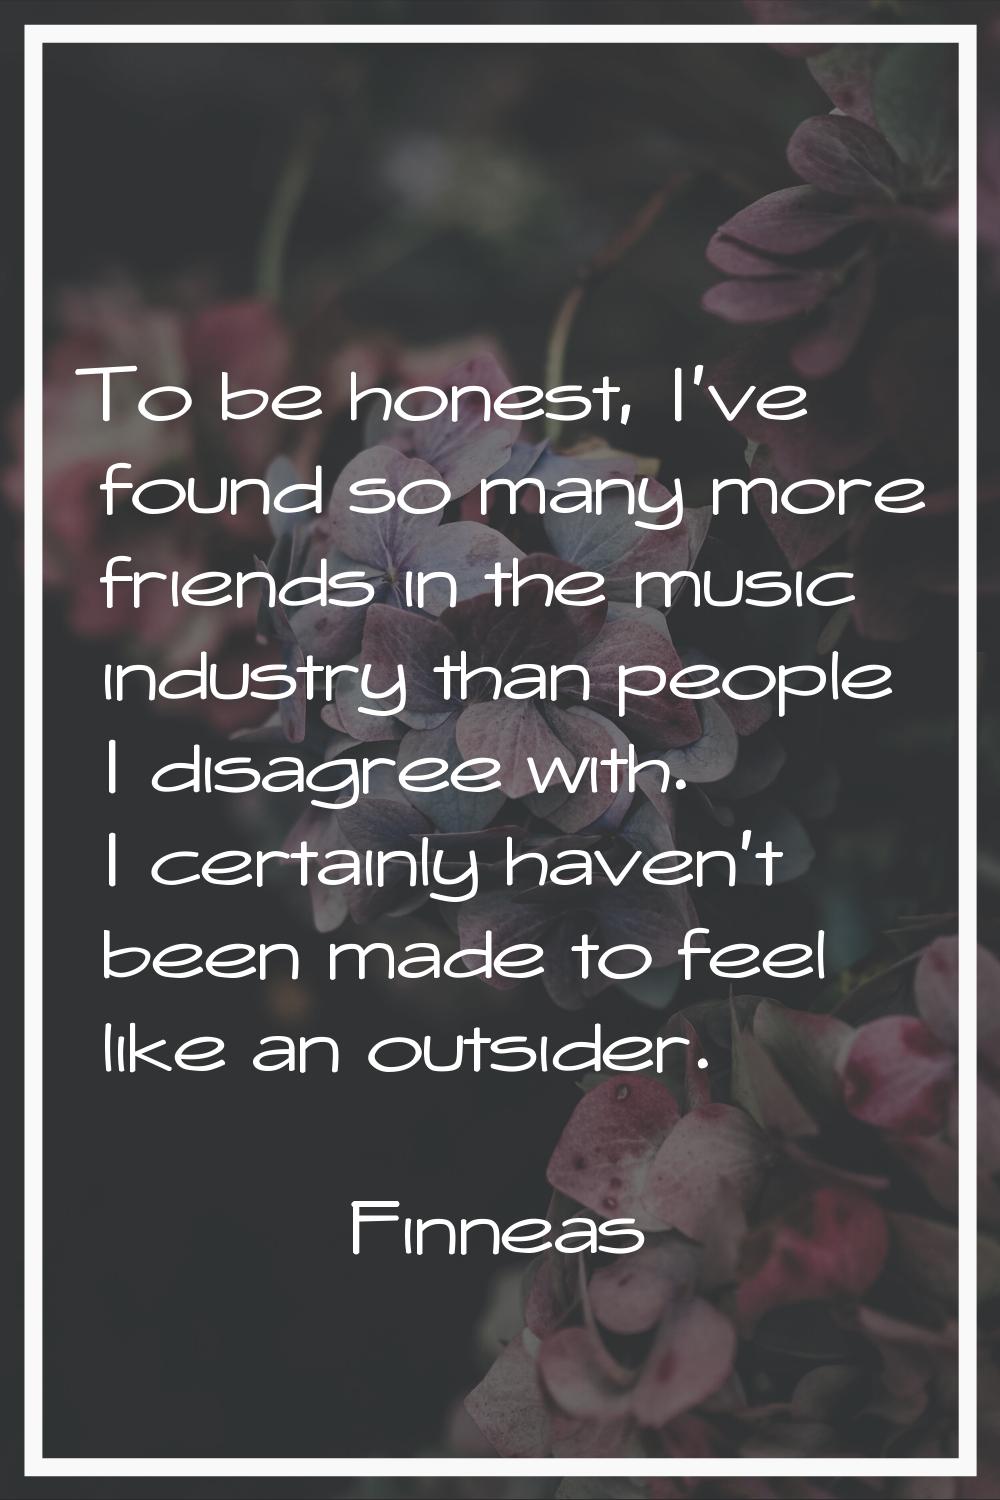 To be honest, I've found so many more friends in the music industry than people I disagree with. I 